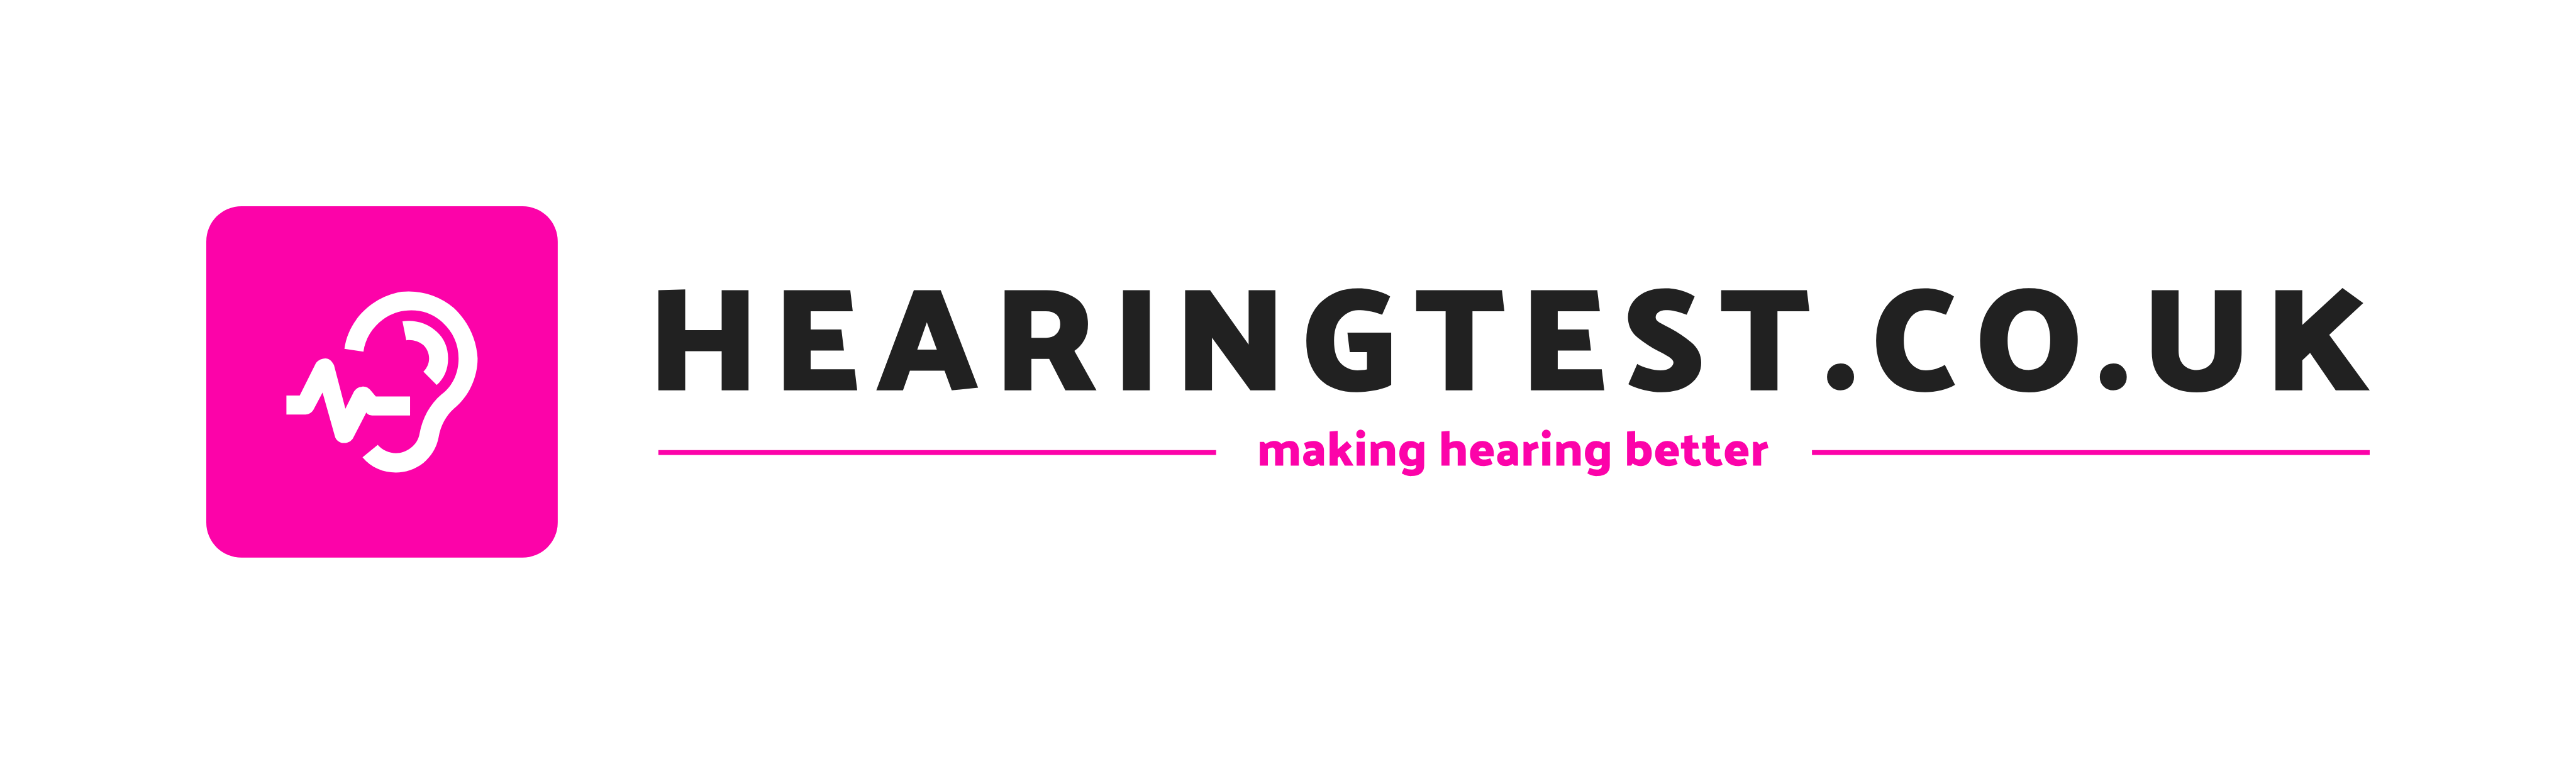 Free Hearing Tests for Children | Hearingtest.co.uk